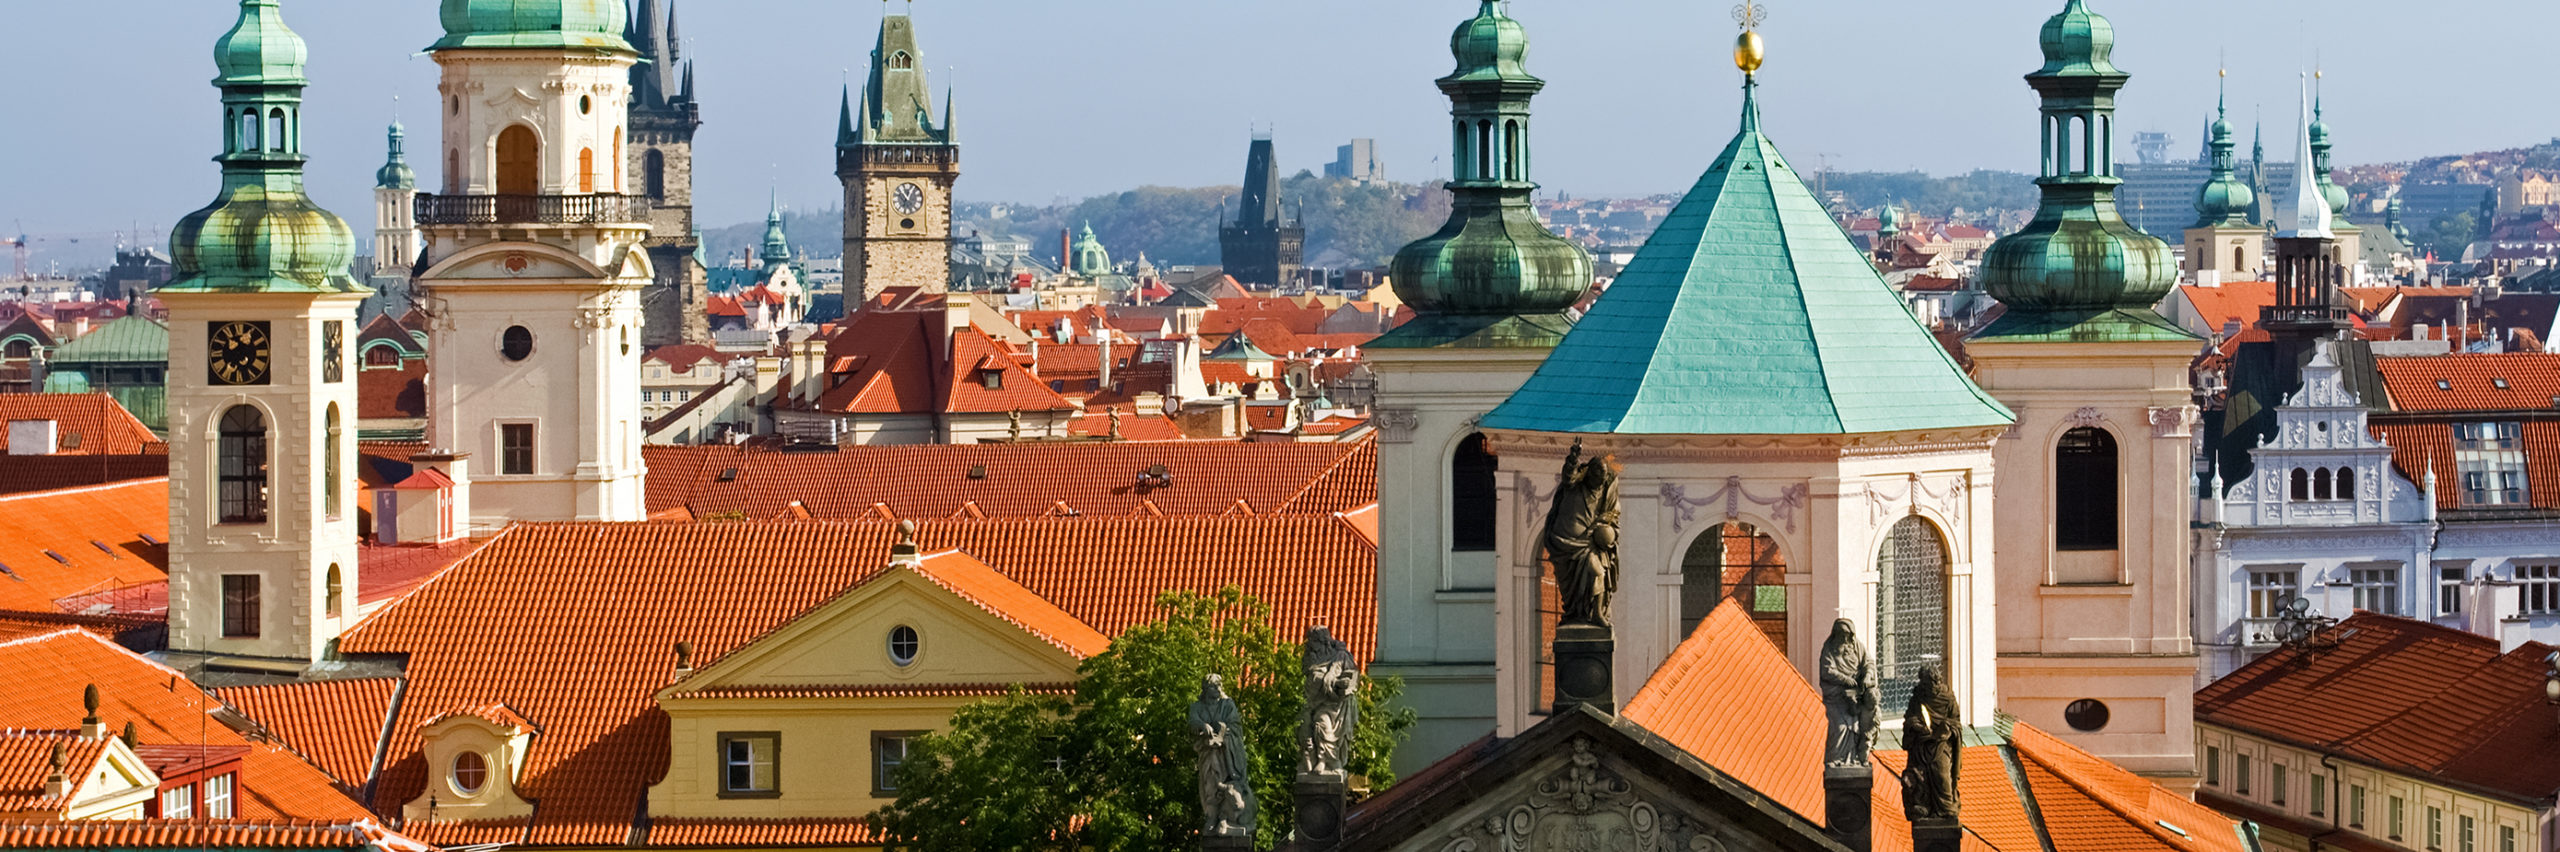 Rooftops of old Prague from high view point - Image